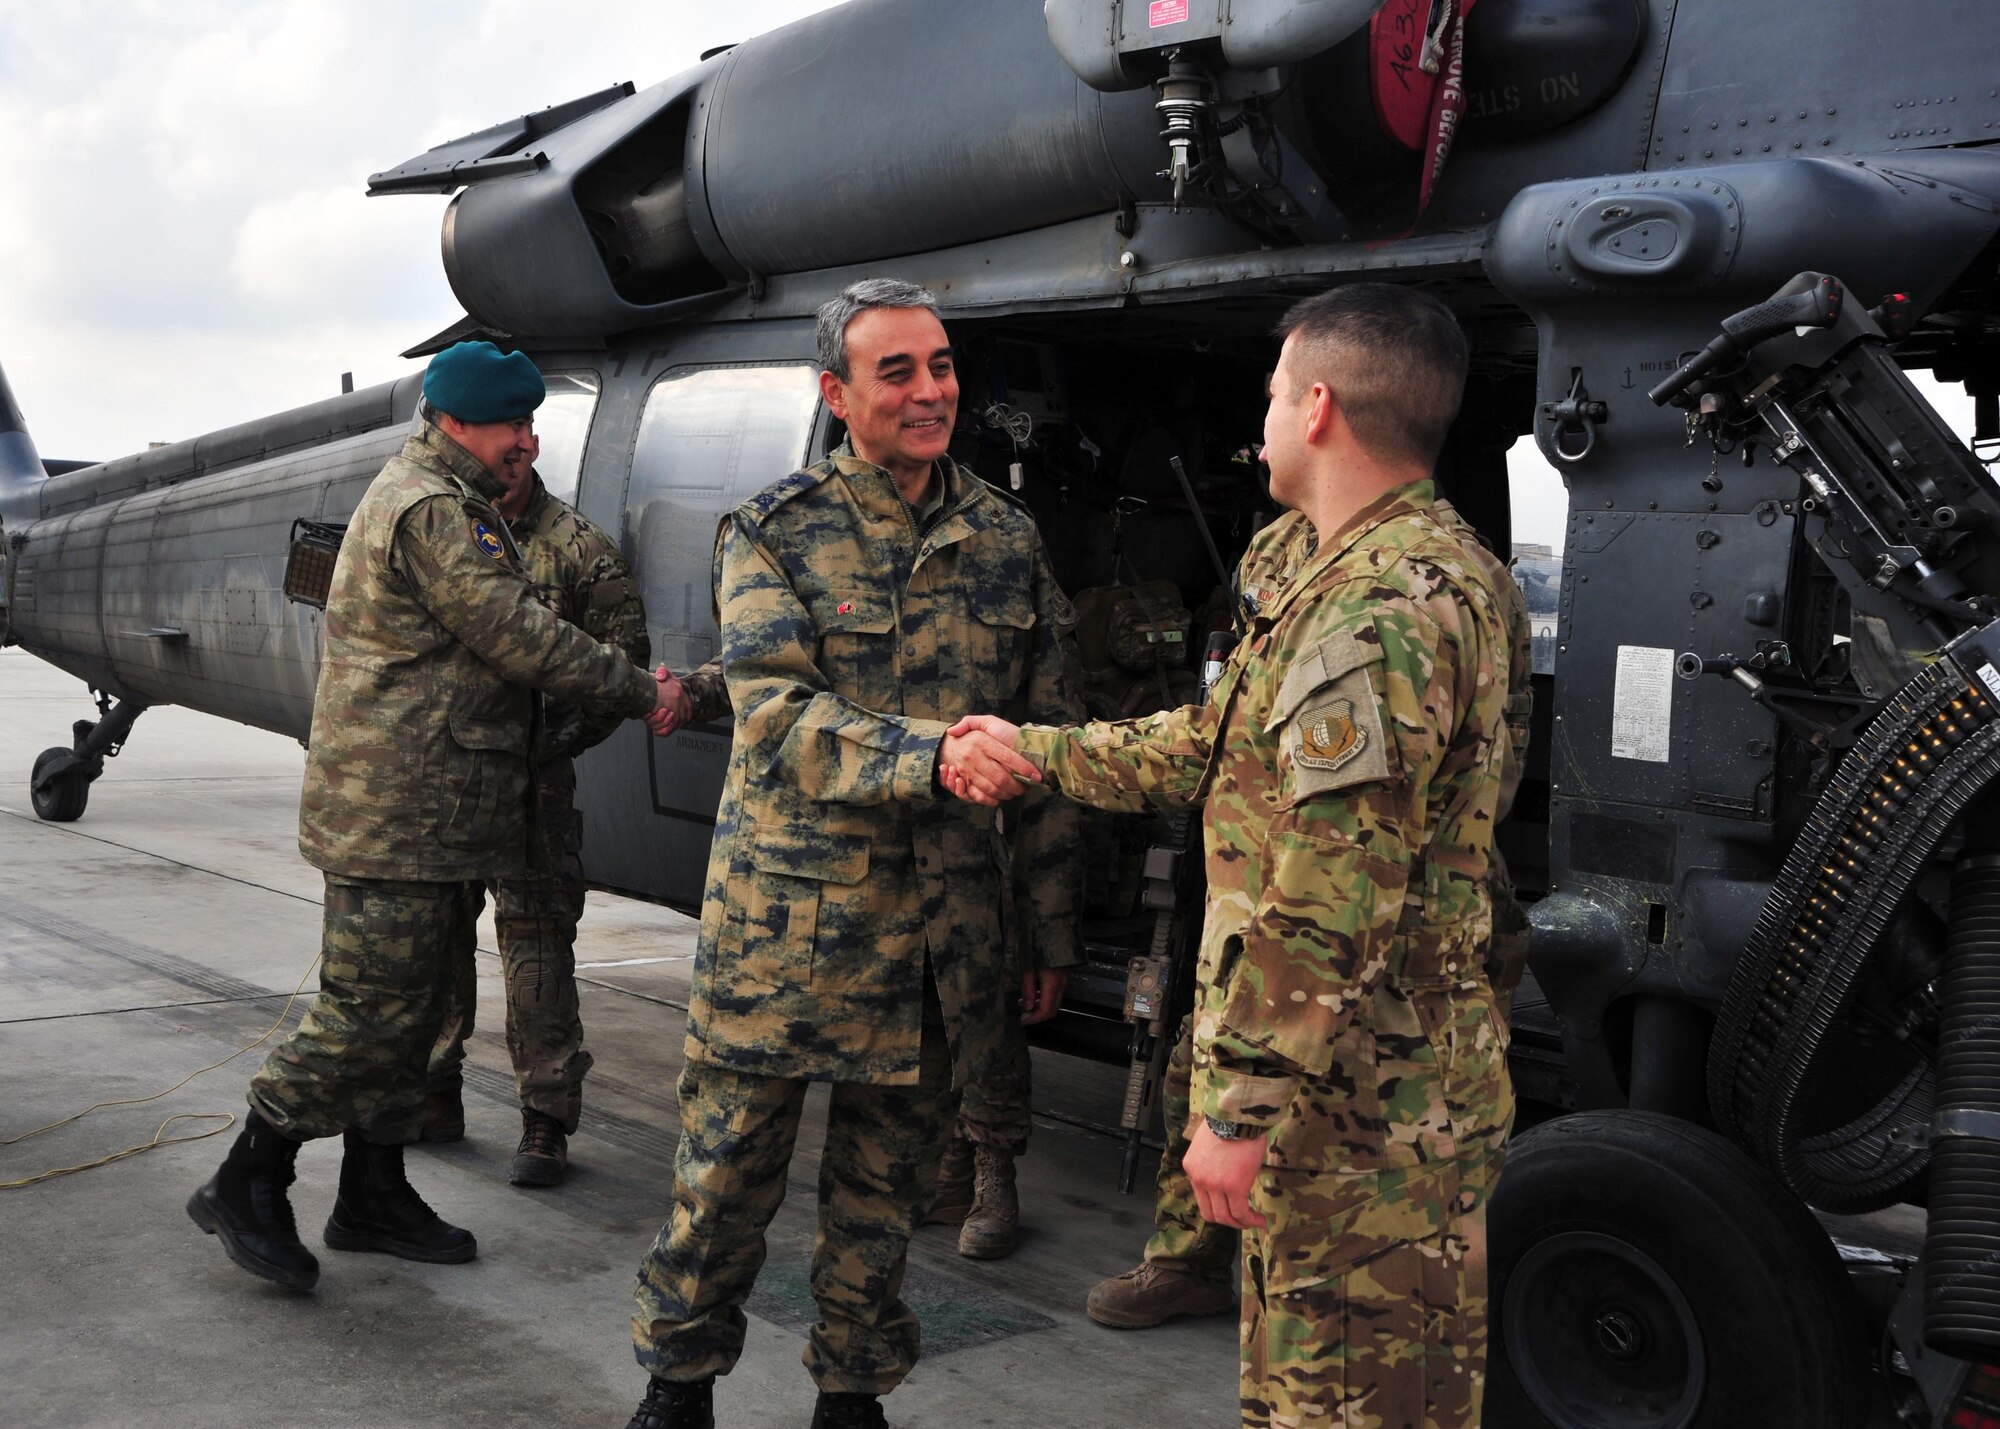 Turkish Air Force Maj. Gen.  Mehmet Cahit Bakir, Commander of Kabul International Airport, shakes hands with U.S. Air Force Capt. Mark Morales, 83rd Expeditionary Rescue Squadron, during a tour Jan. 22, 2015 at Bagram Airfield, Afghanistan. During the tour, Bakir had the opportunity to meet with 455th Air Expeditionary Wing leadership and become better acquainted with Air Force assets and squadrons here. (U.S. Air Force photo by Staff Sgt. Whitney Amstutz/released)